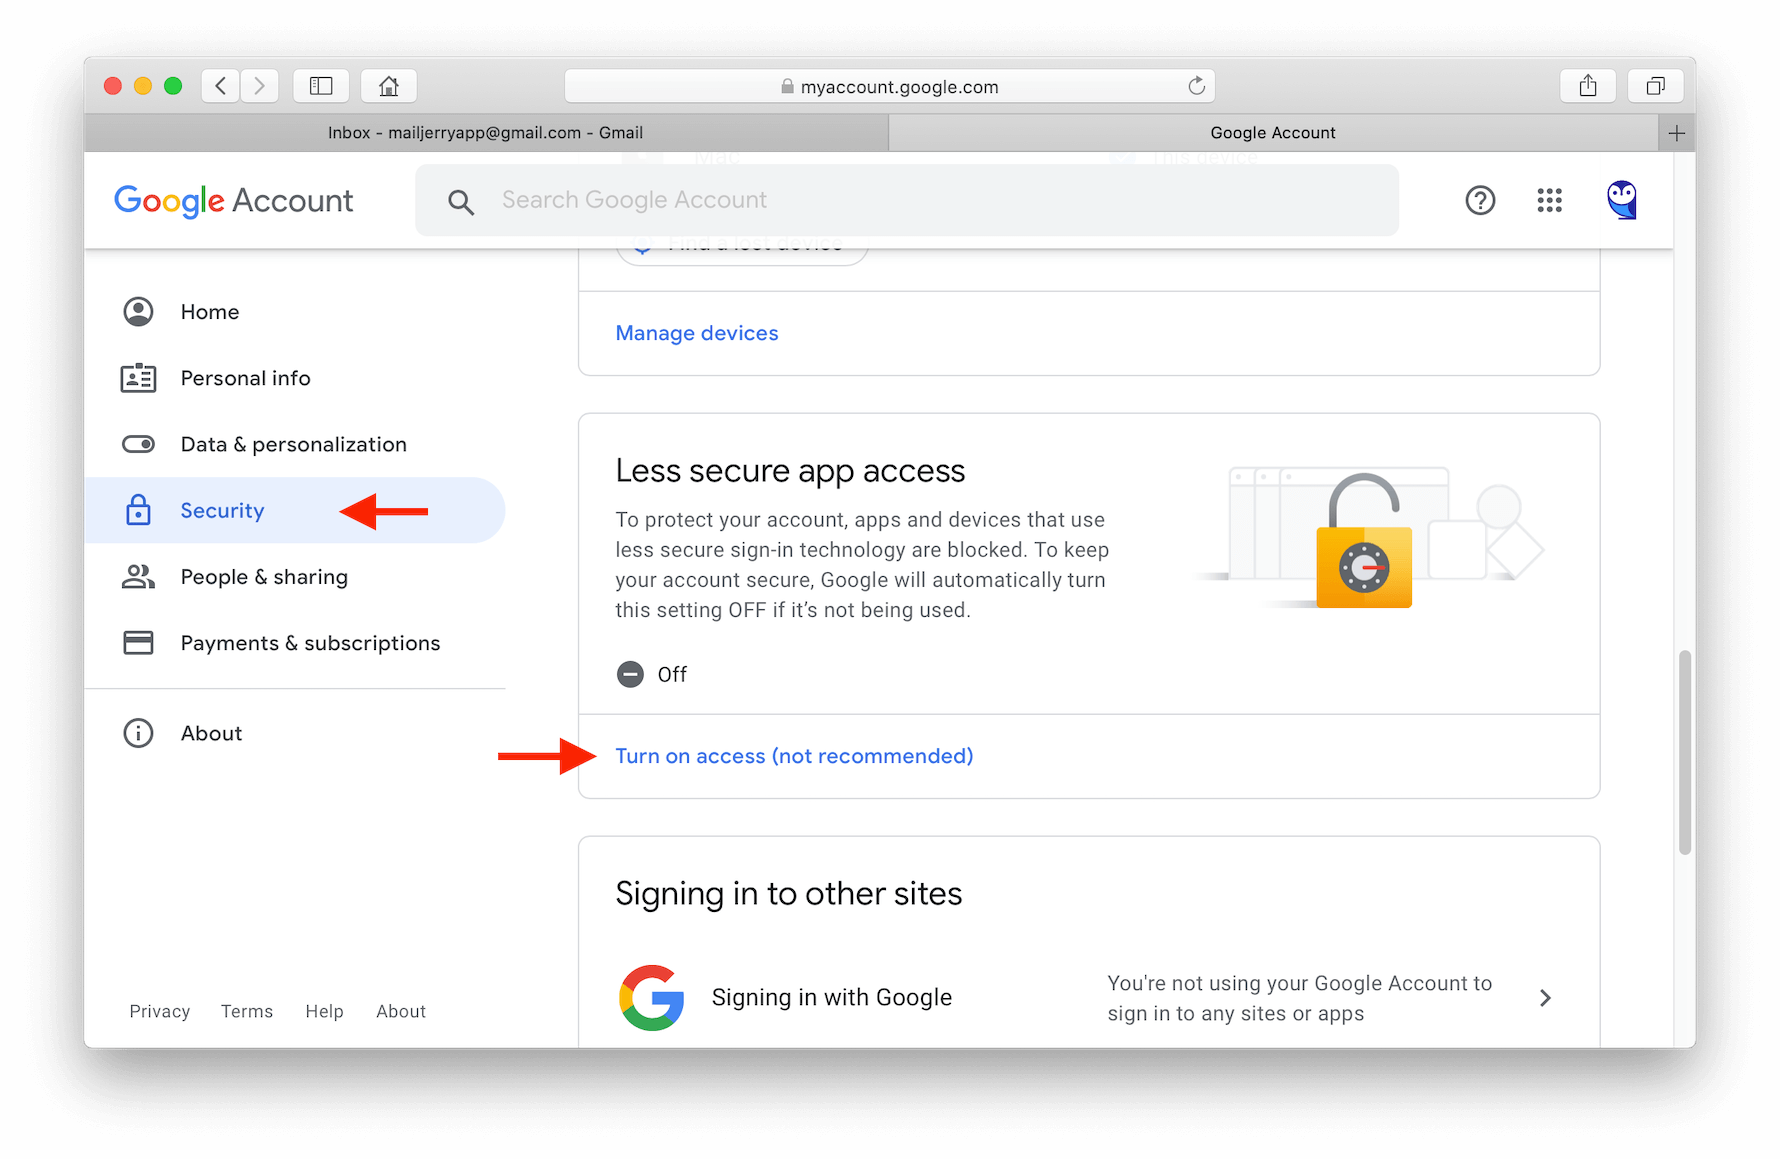 Open the section "Security" and go to "Less secure app access"